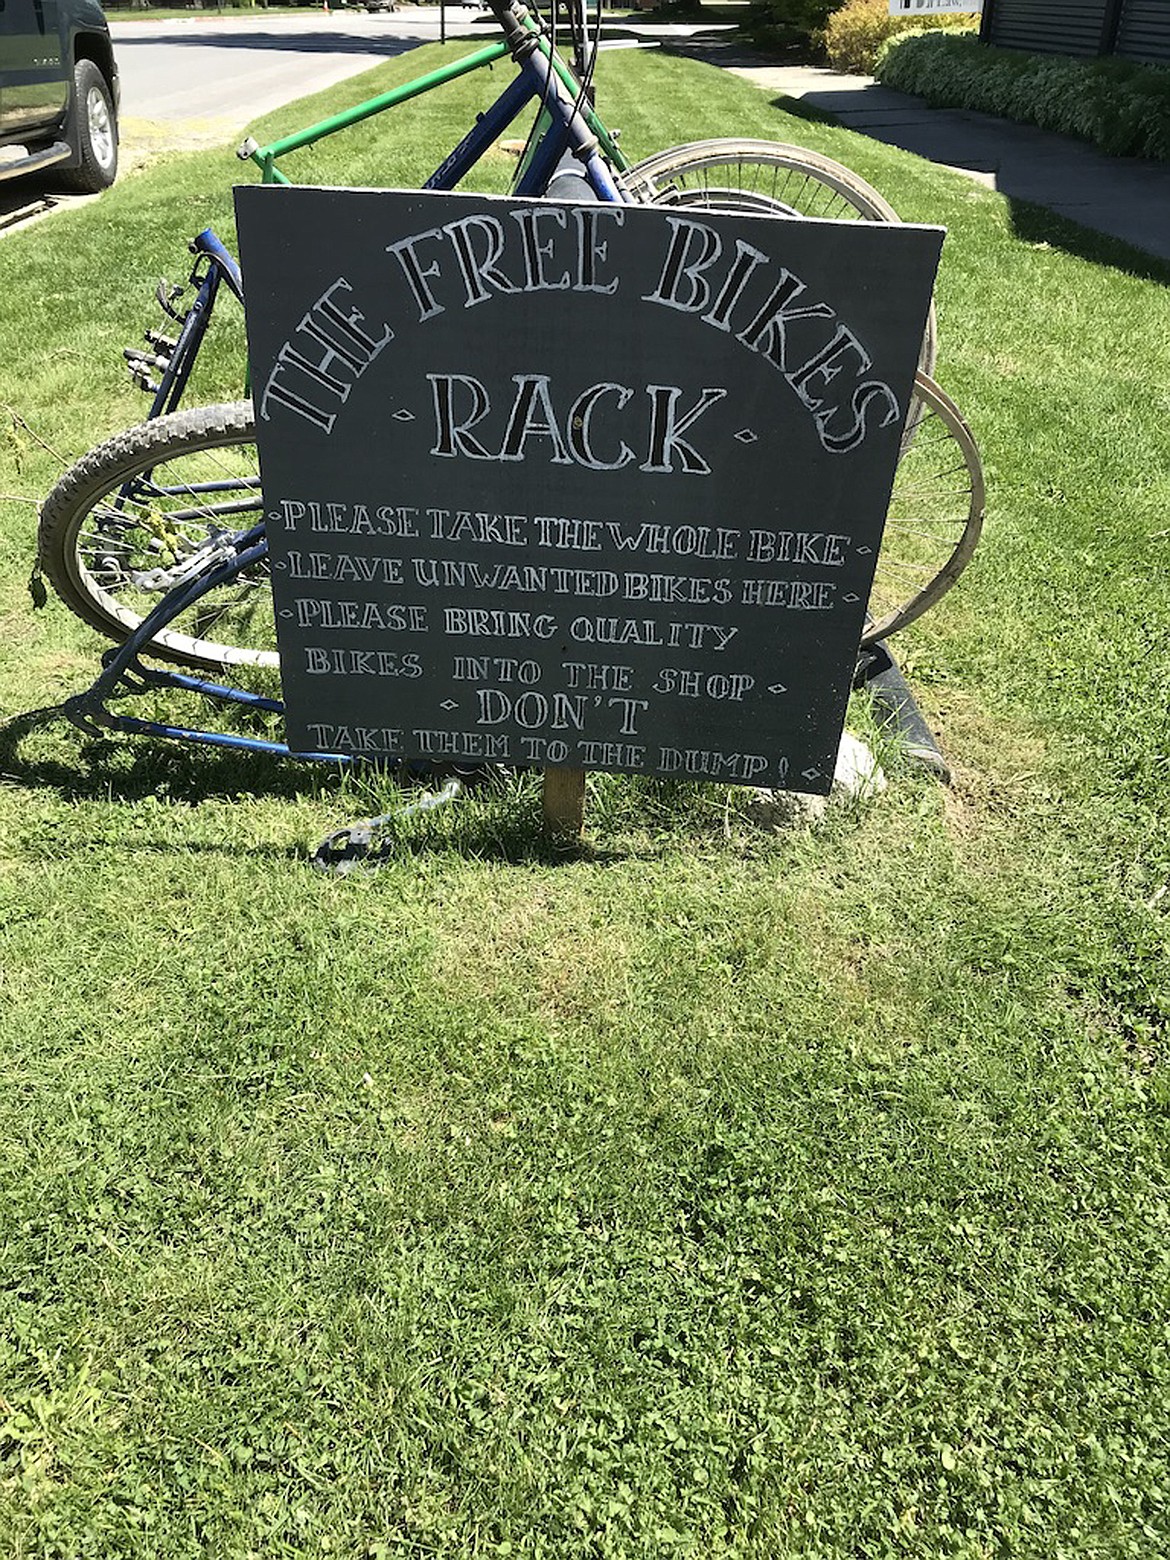 (Photo by SUSAN DRINKARD) 
 A sign at the bicycle shop encourages residents to drop off their old, tired bikes there instead of taking them to the dump.